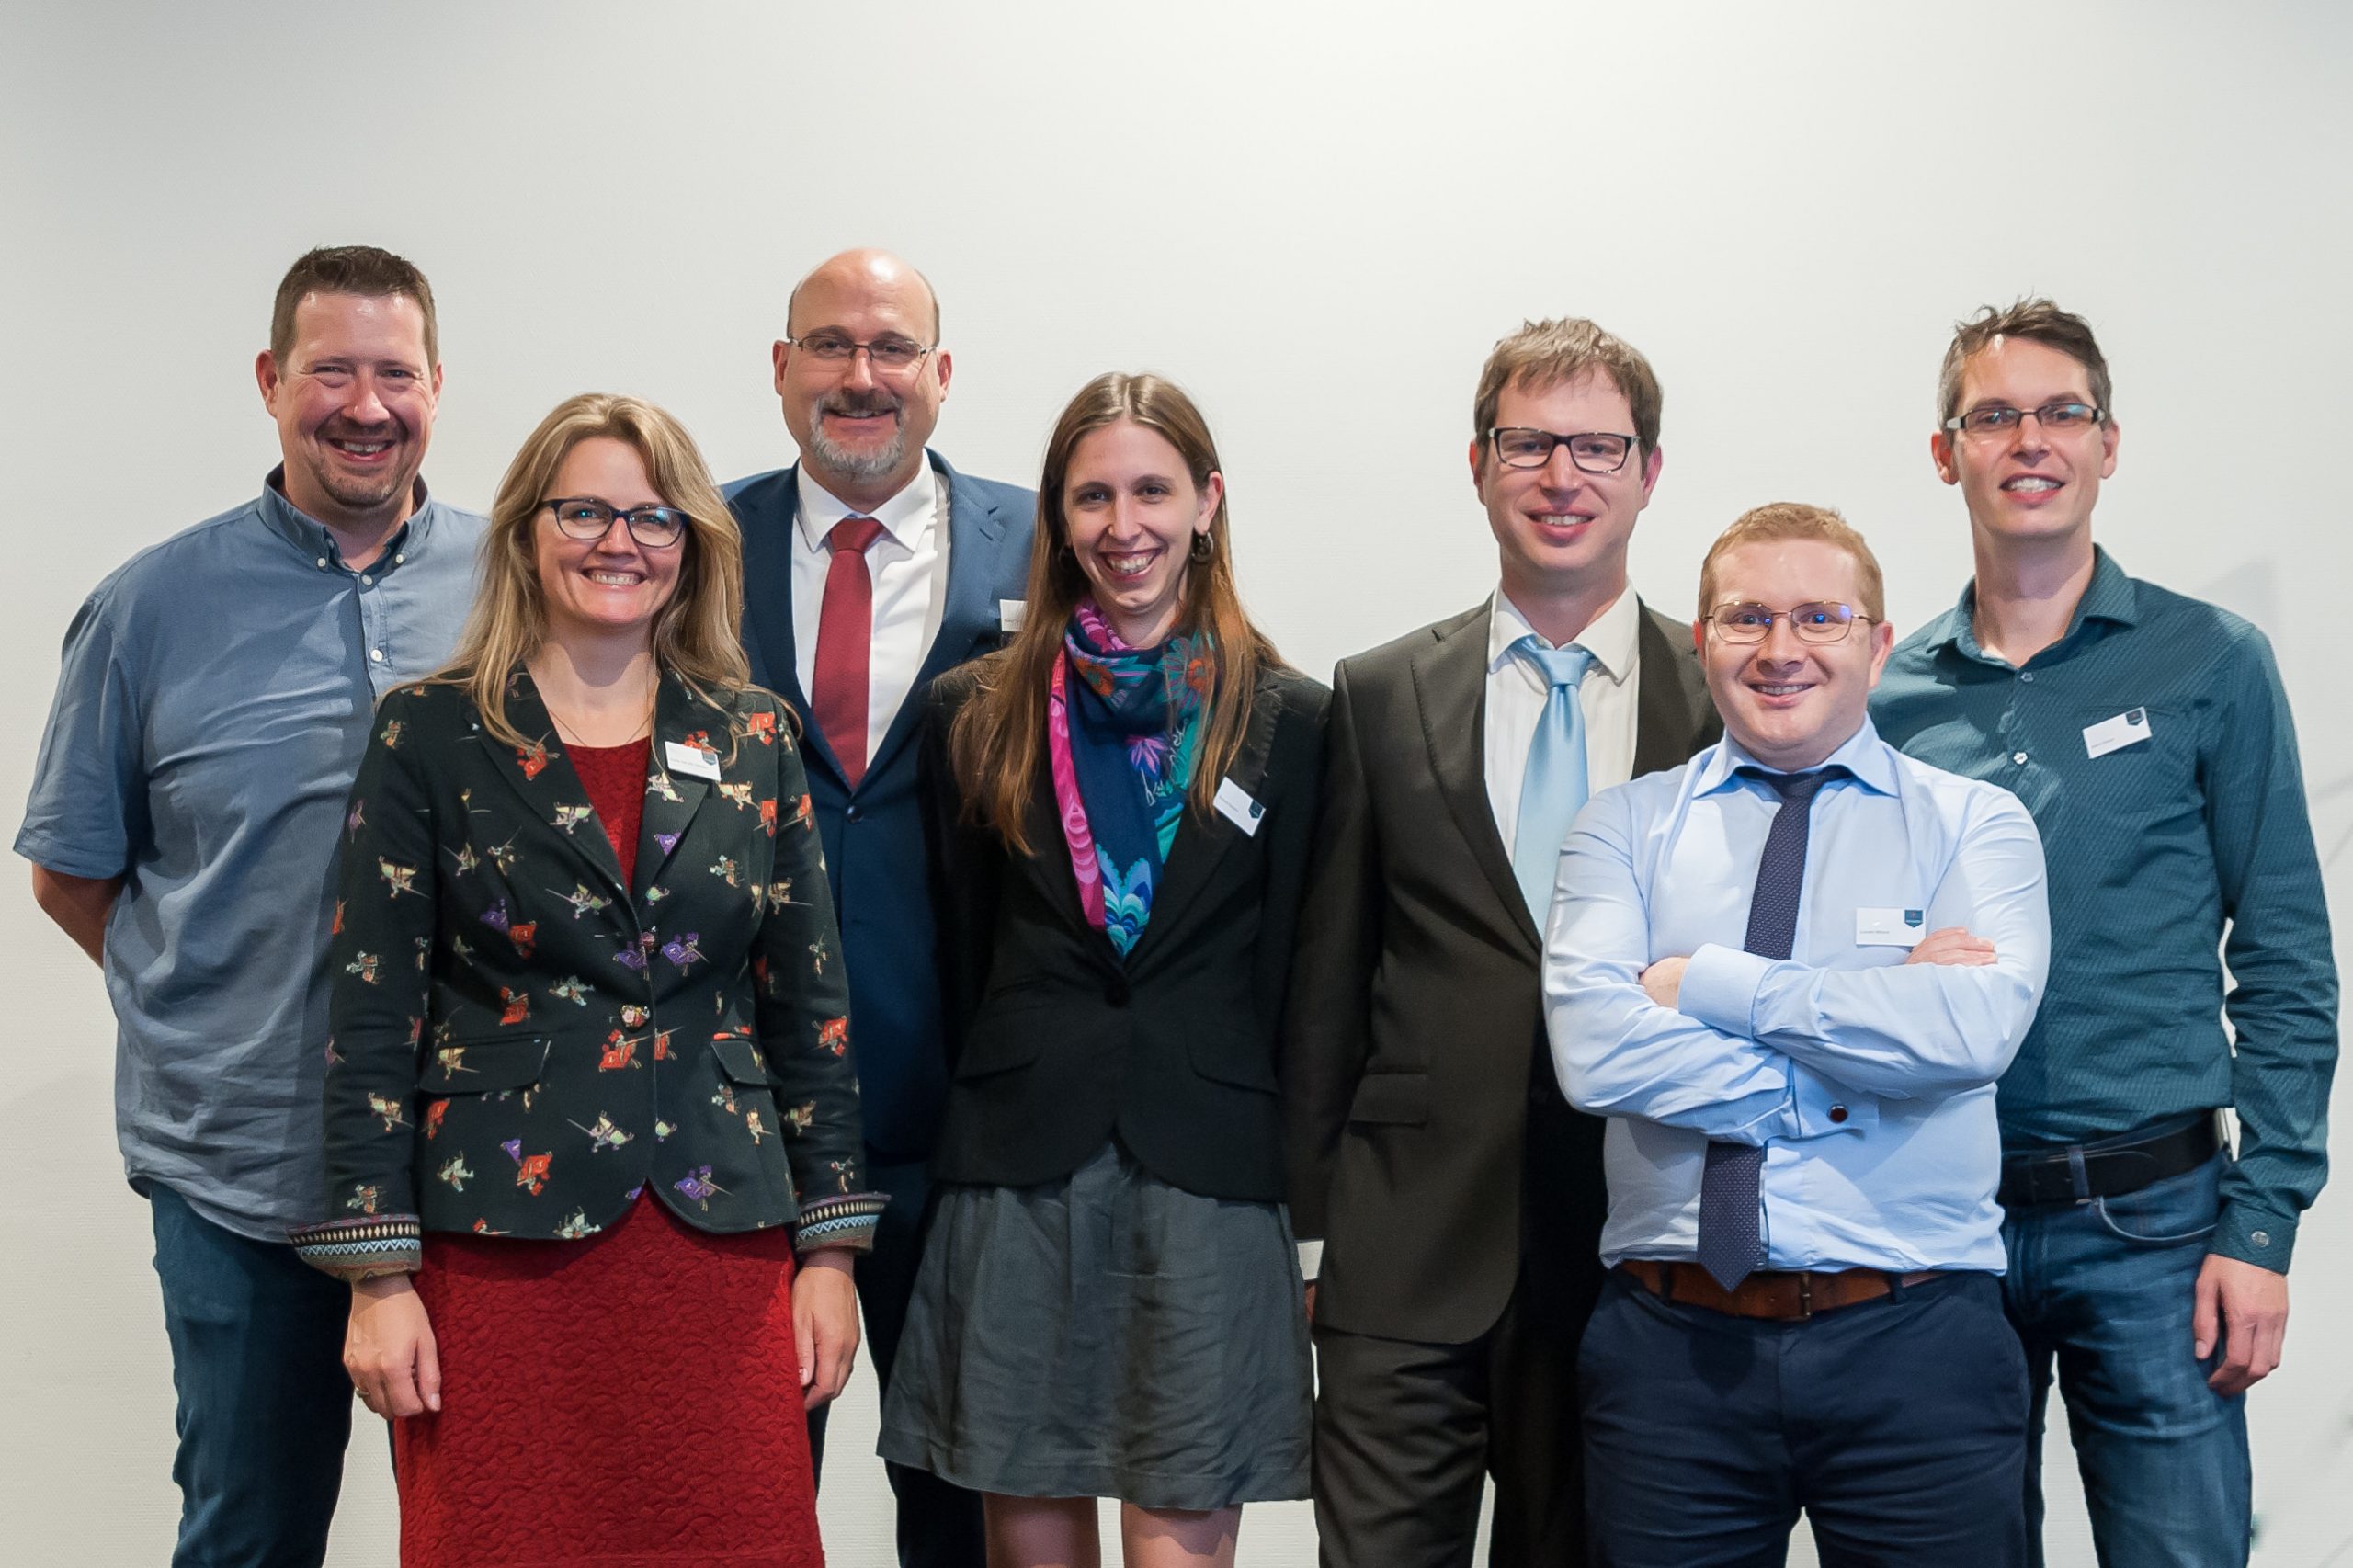 The Zetadec team, from left to right: Robert (IT), Diane (administrative), Menno (owner/director), Oriane, Marcel and Lucian (researchers) and Mark (legal). Photo: Mirian Hendriks